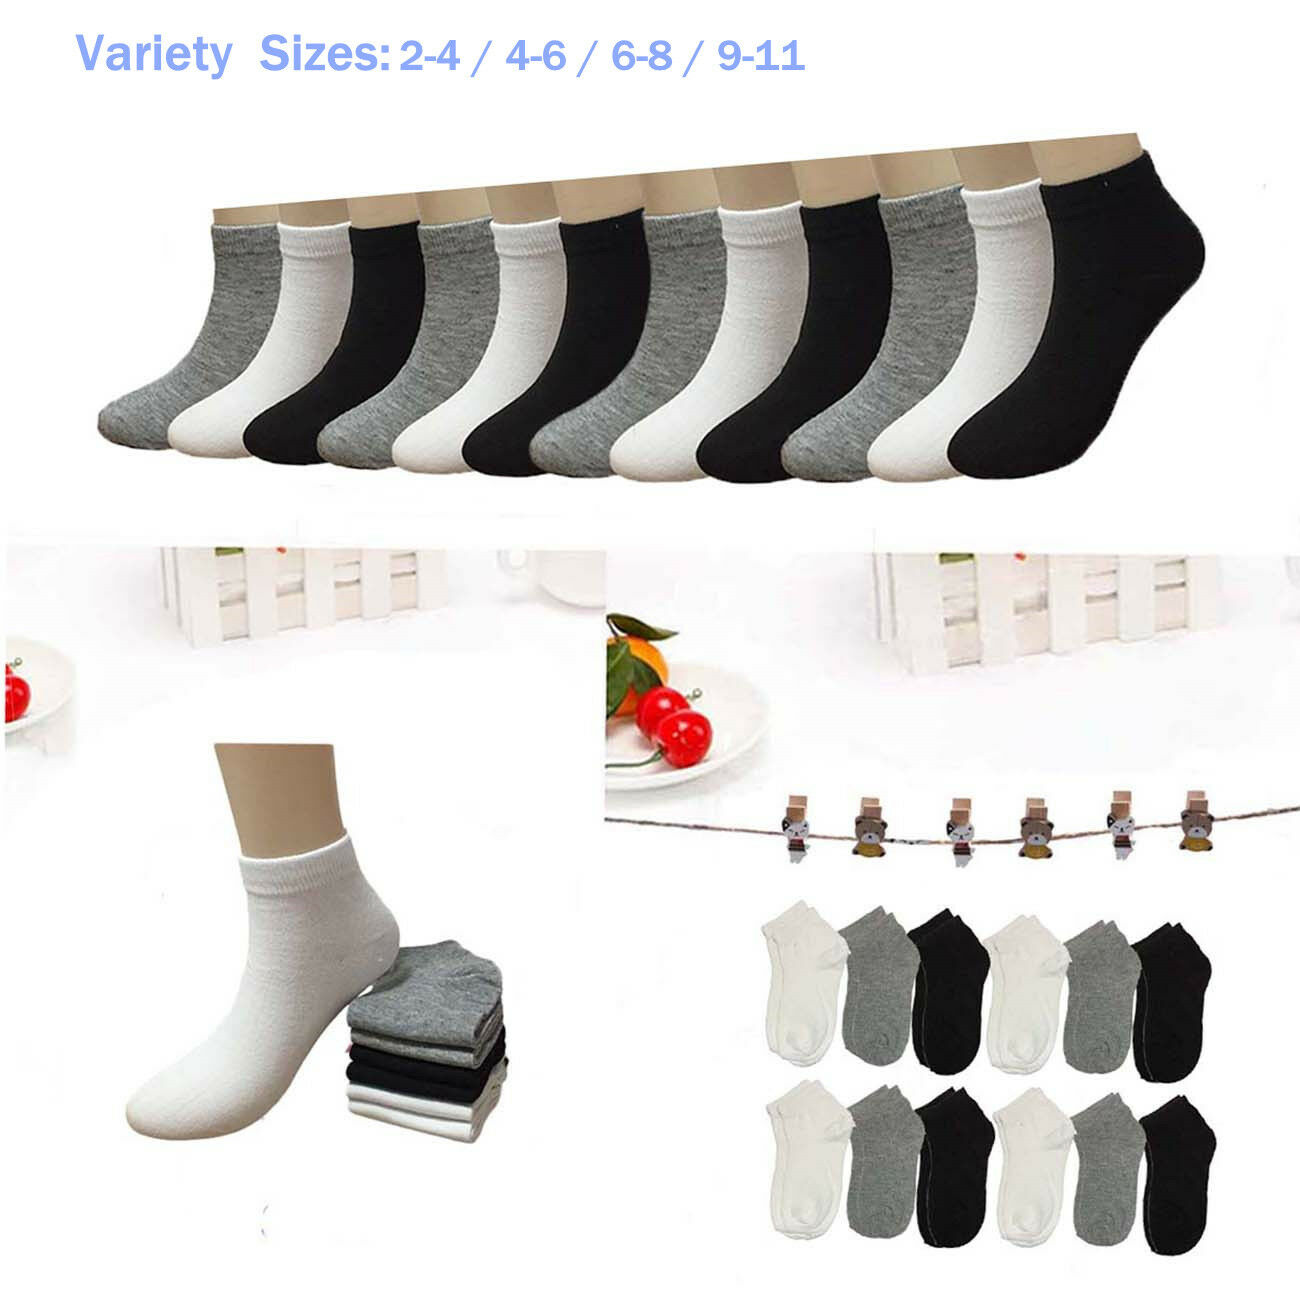 New 6-12 Pairs Child Girls Kids Ankle Low Cut Socks Solid Cotton Multiple Sizes